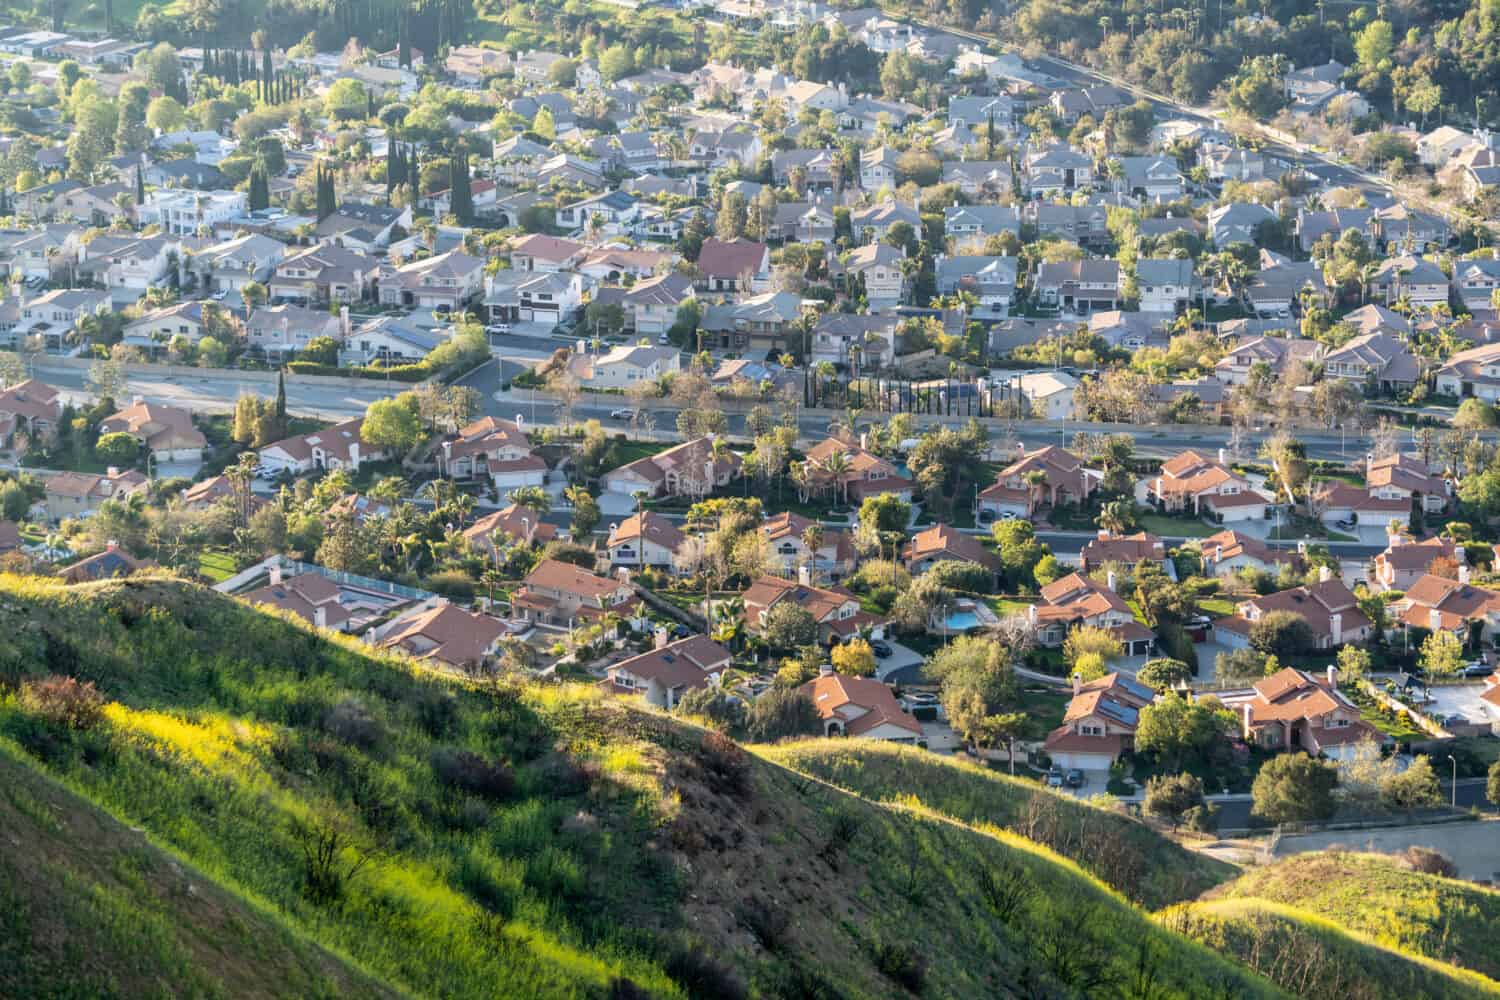 Mountain slopes and valley homes in the Granada Hills area of north Los Angeles, California.